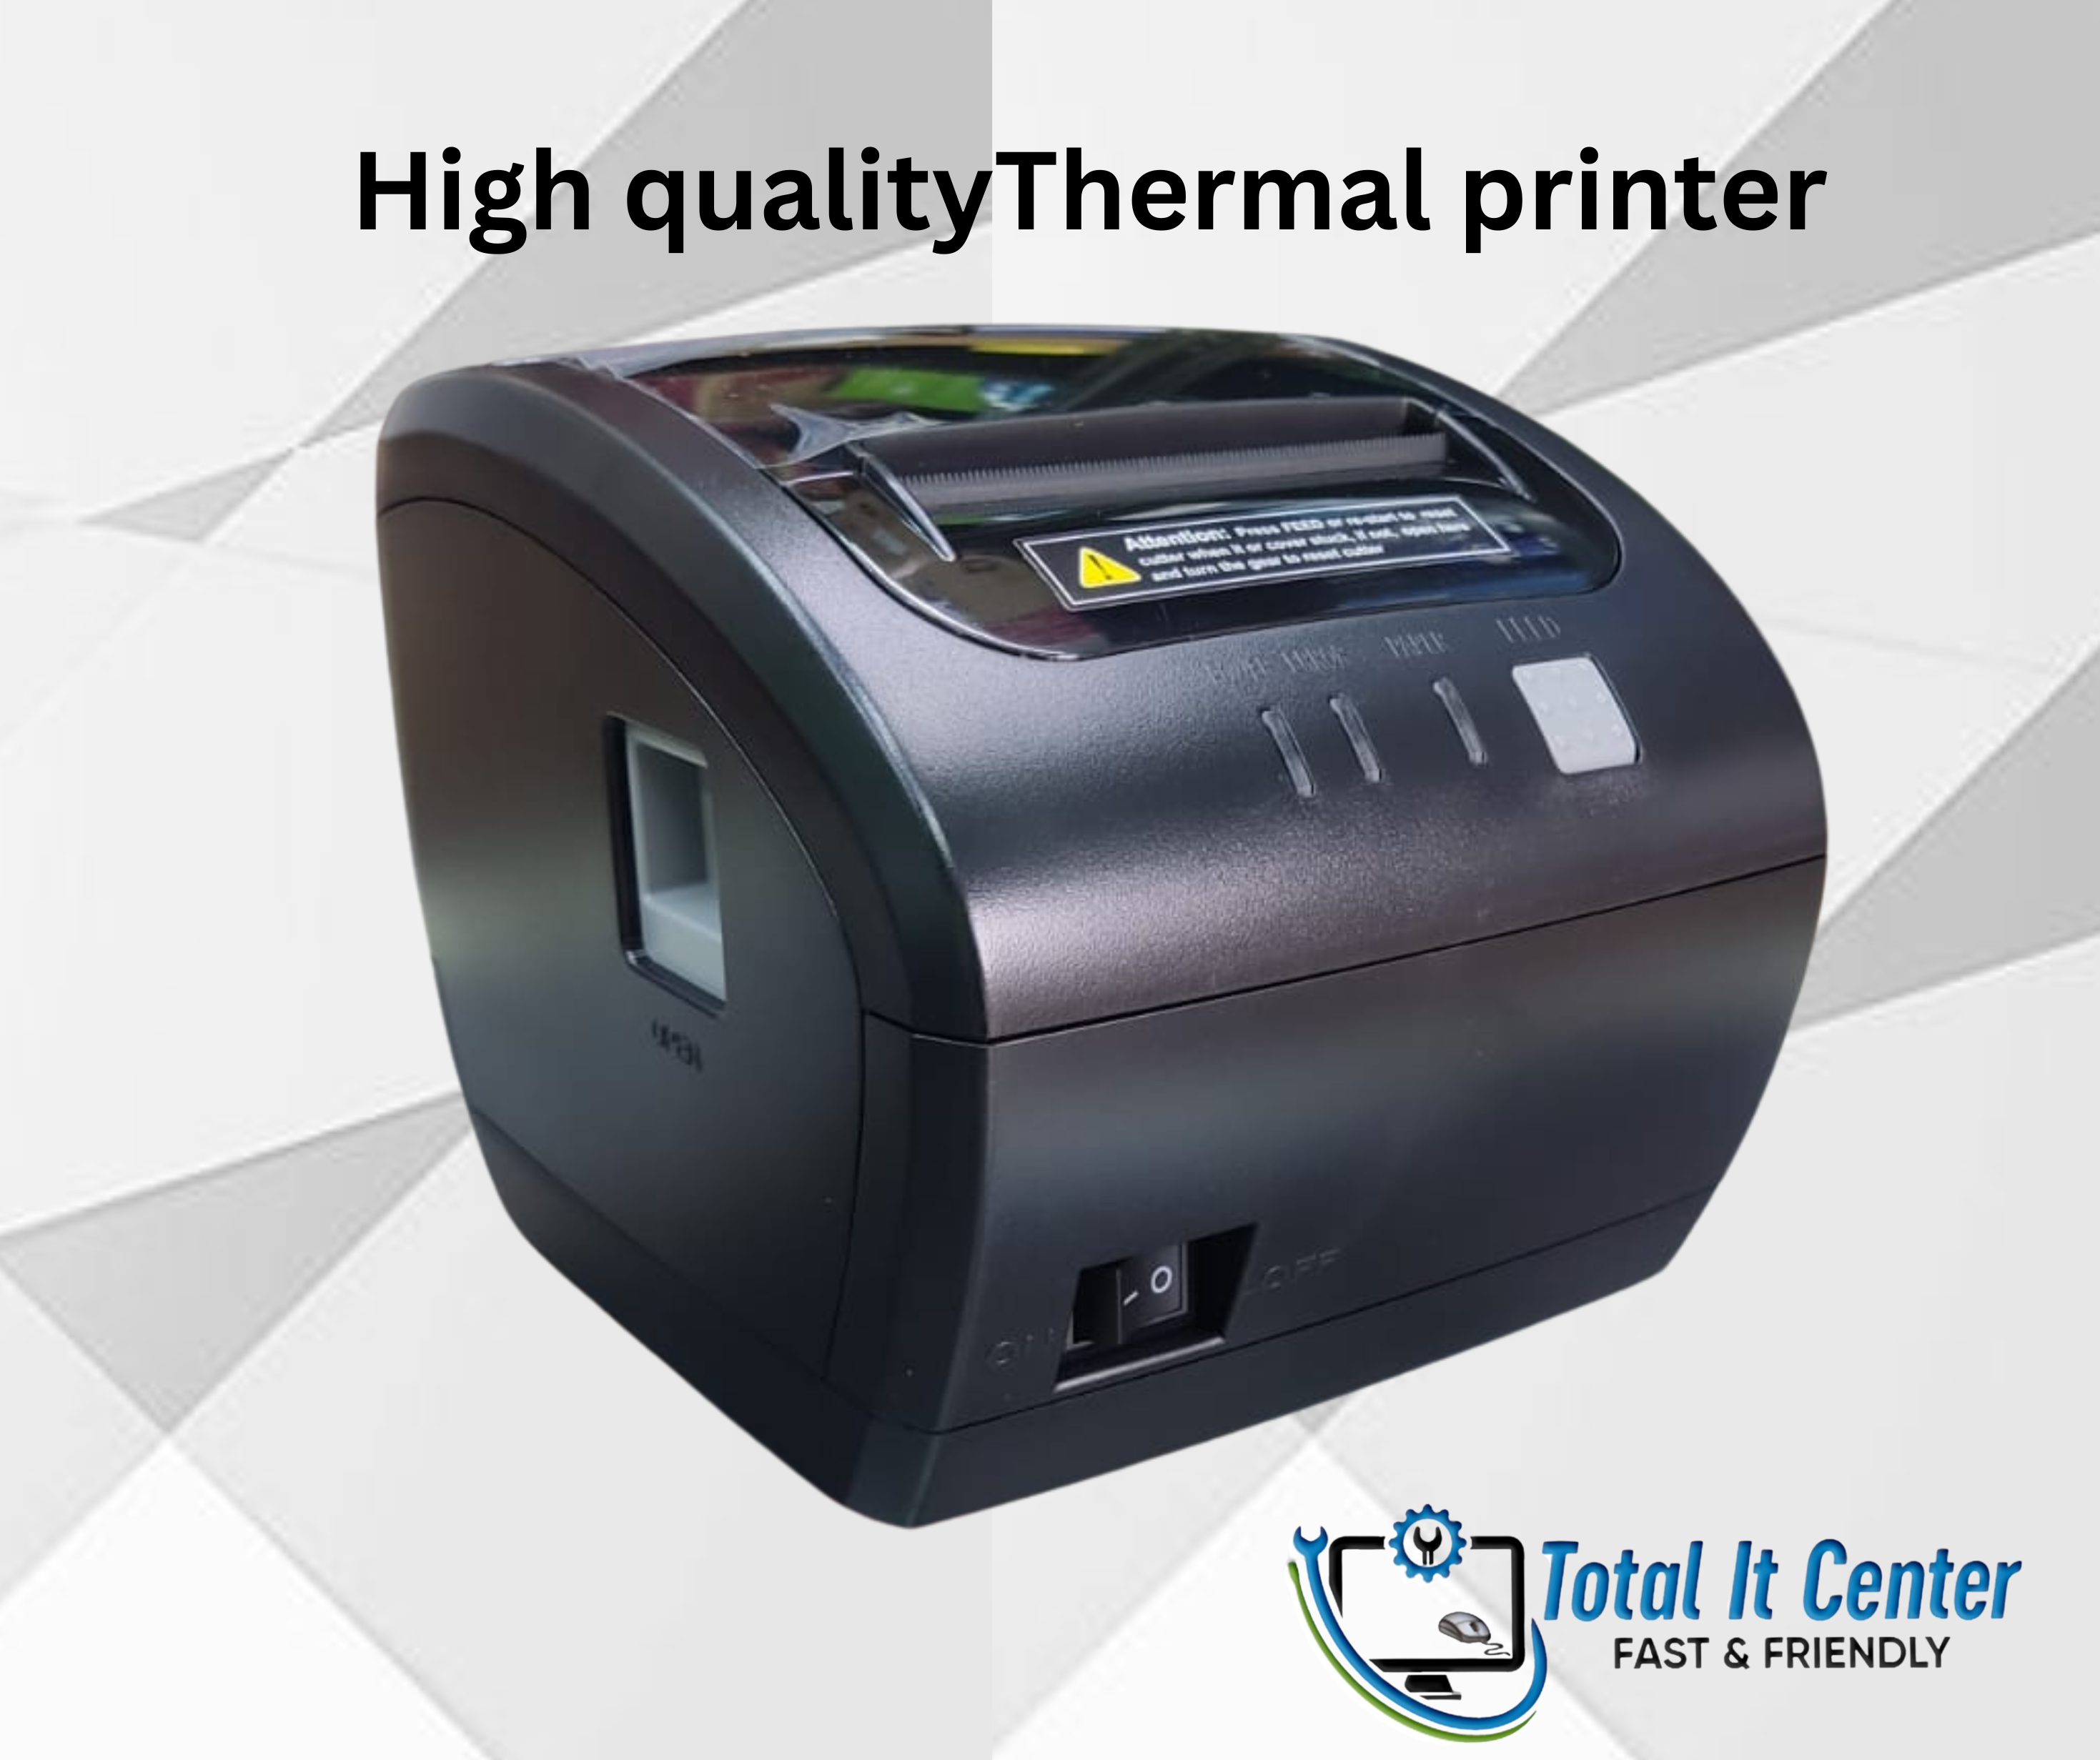 Themal printer price in nepal with 1 years warranty